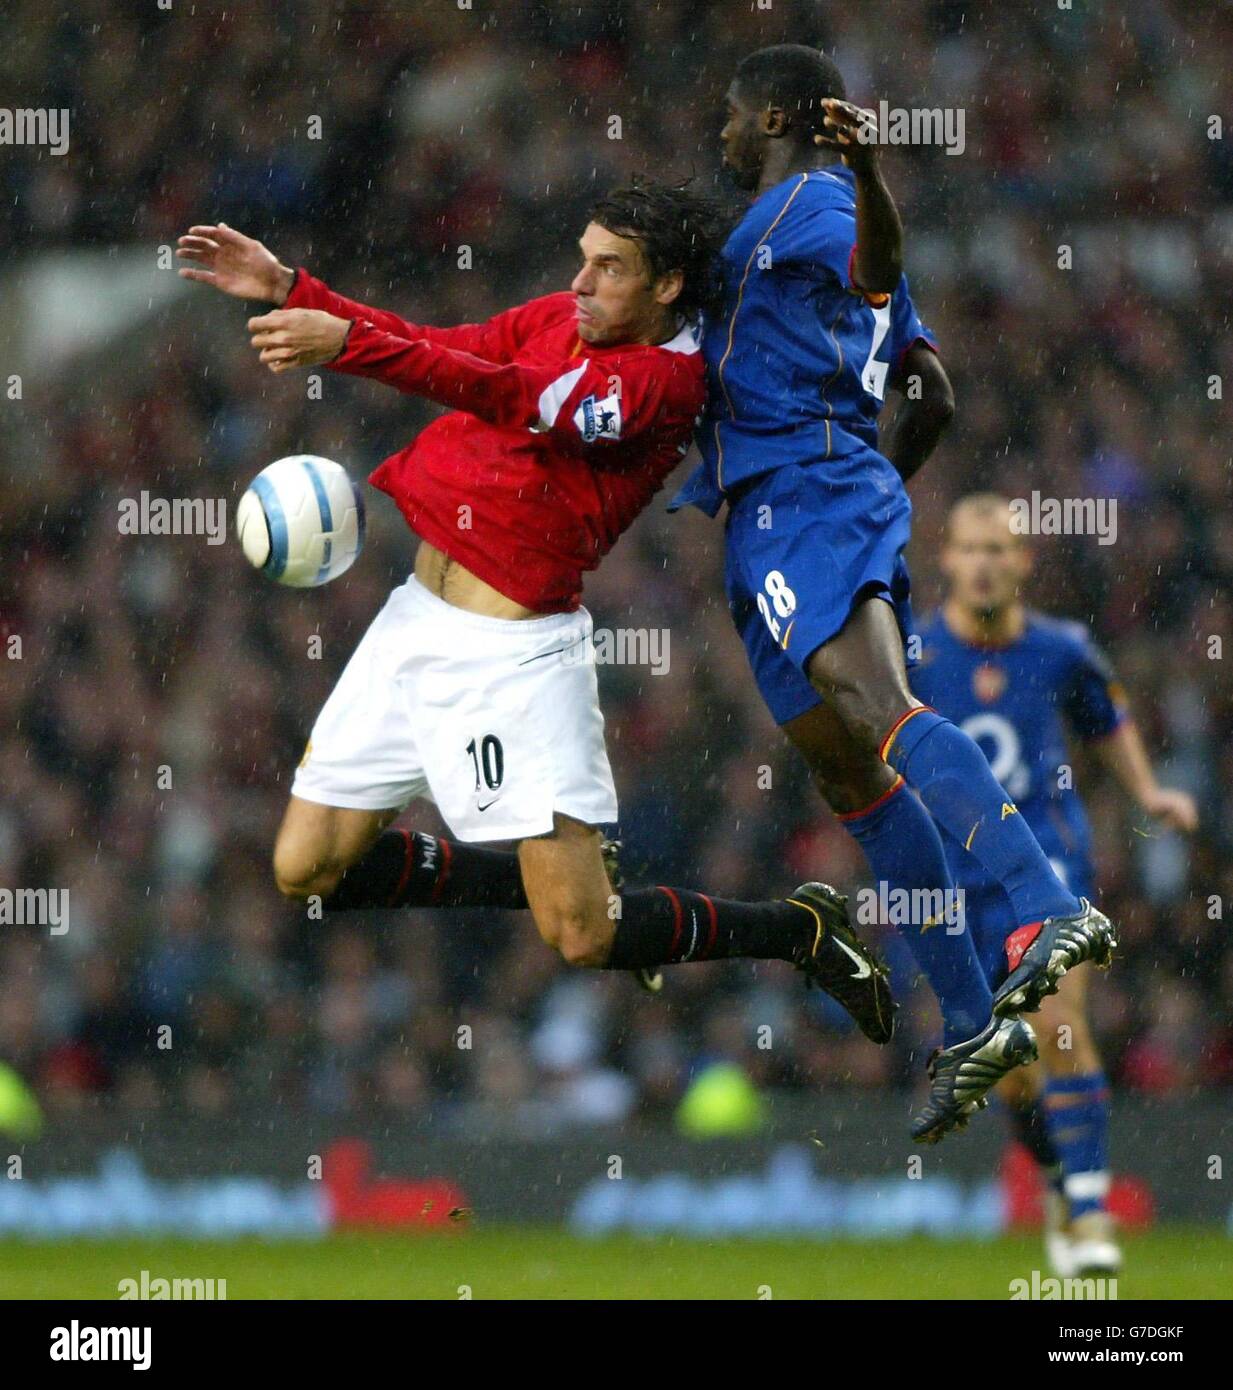 Ruud Van Nistelrooy of Manchester United battles with Arsenal's Kolo Toure during the Barclays Premiership match at Old Trafford, Manchester. Stock Photo